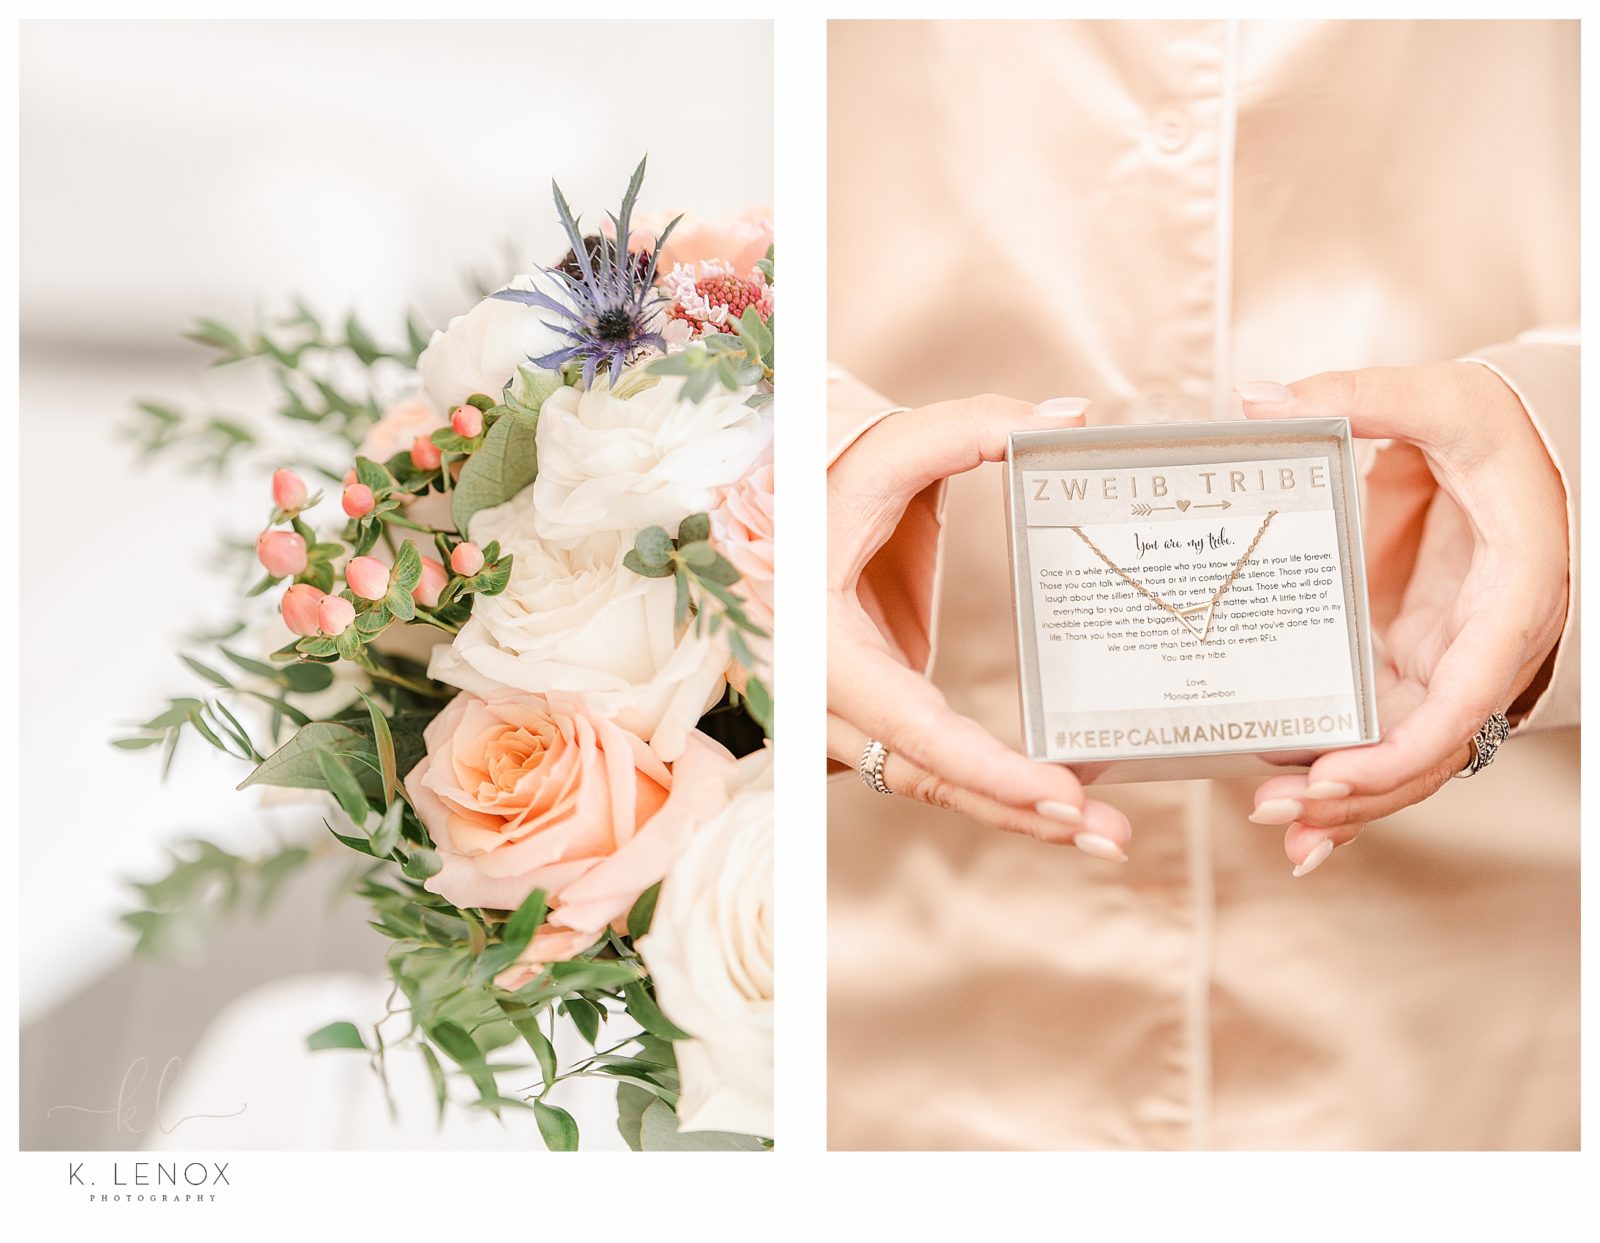 Monique + Zach's | Wedding at the Wentworth Country Club